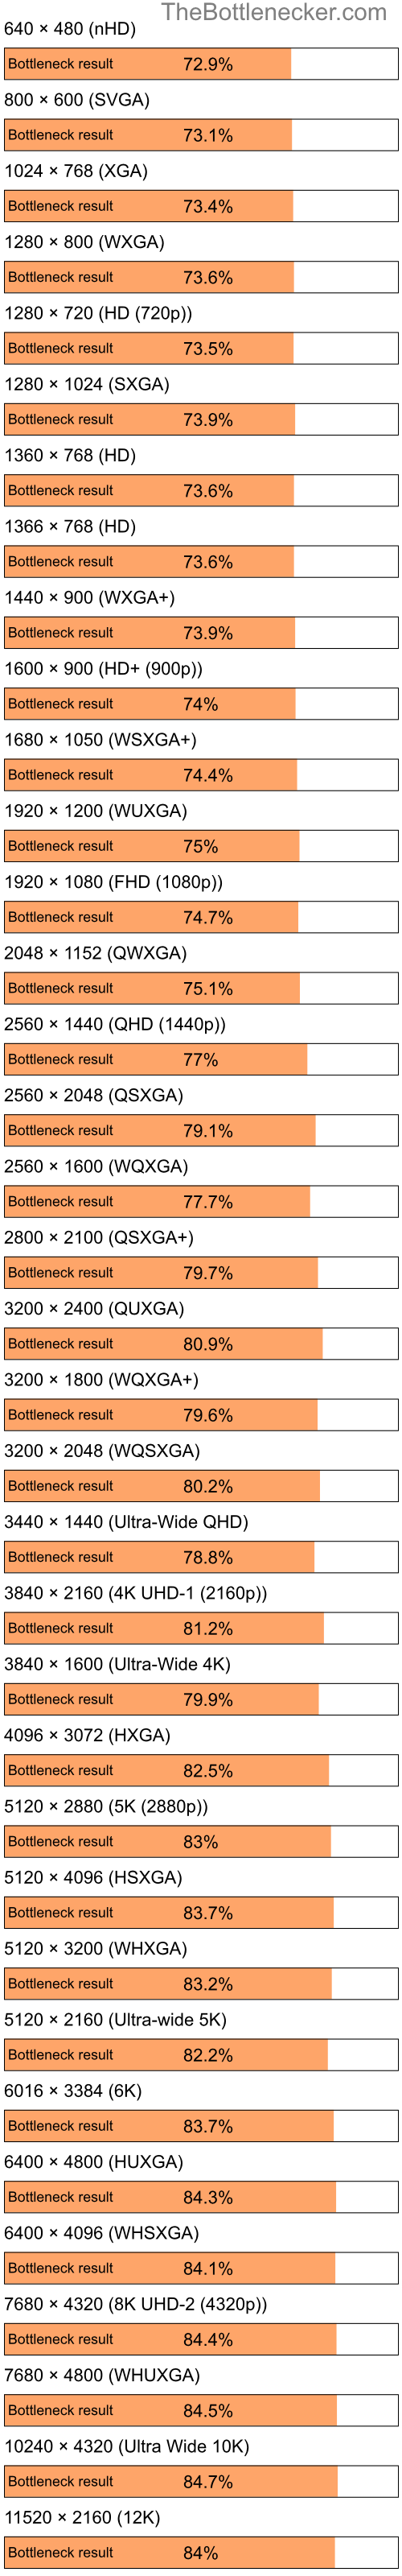 Bottleneck results by resolution for Intel Atom Z520 and NVIDIA GeForce 9300 GE in Graphic Card Intense Tasks